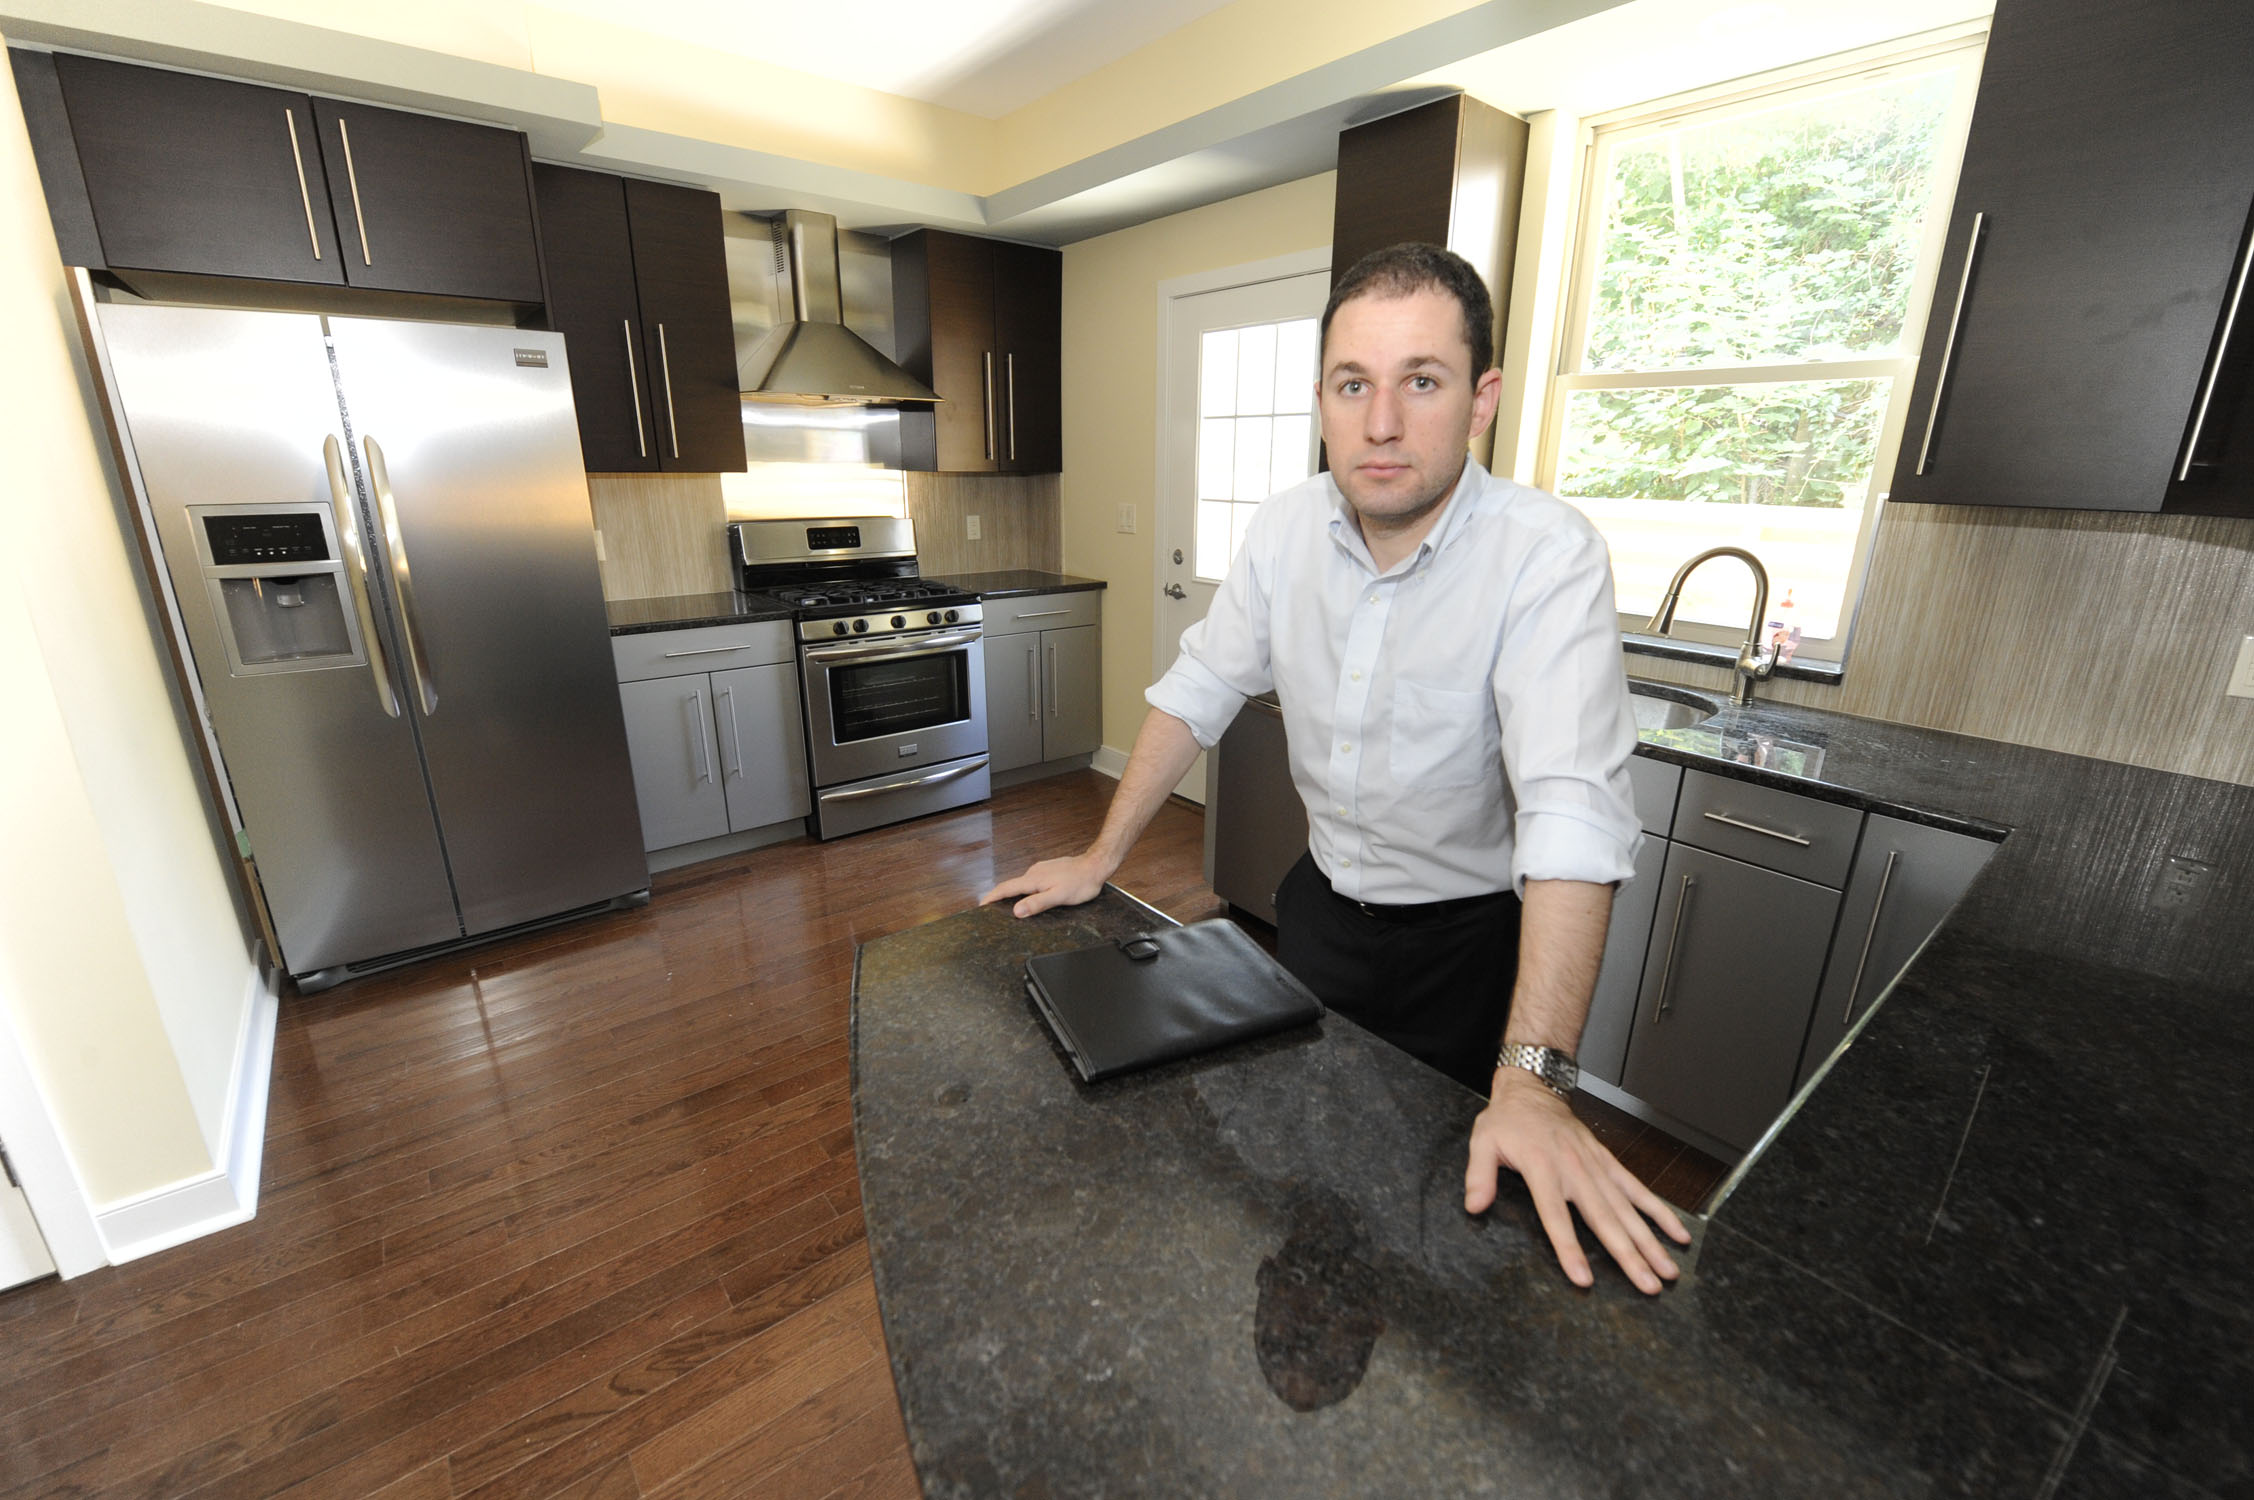 Developer Feibush in a townhome built on a tax delinquent lot he purchased at sheriff sale. (Clem Murray/ Inquirer)